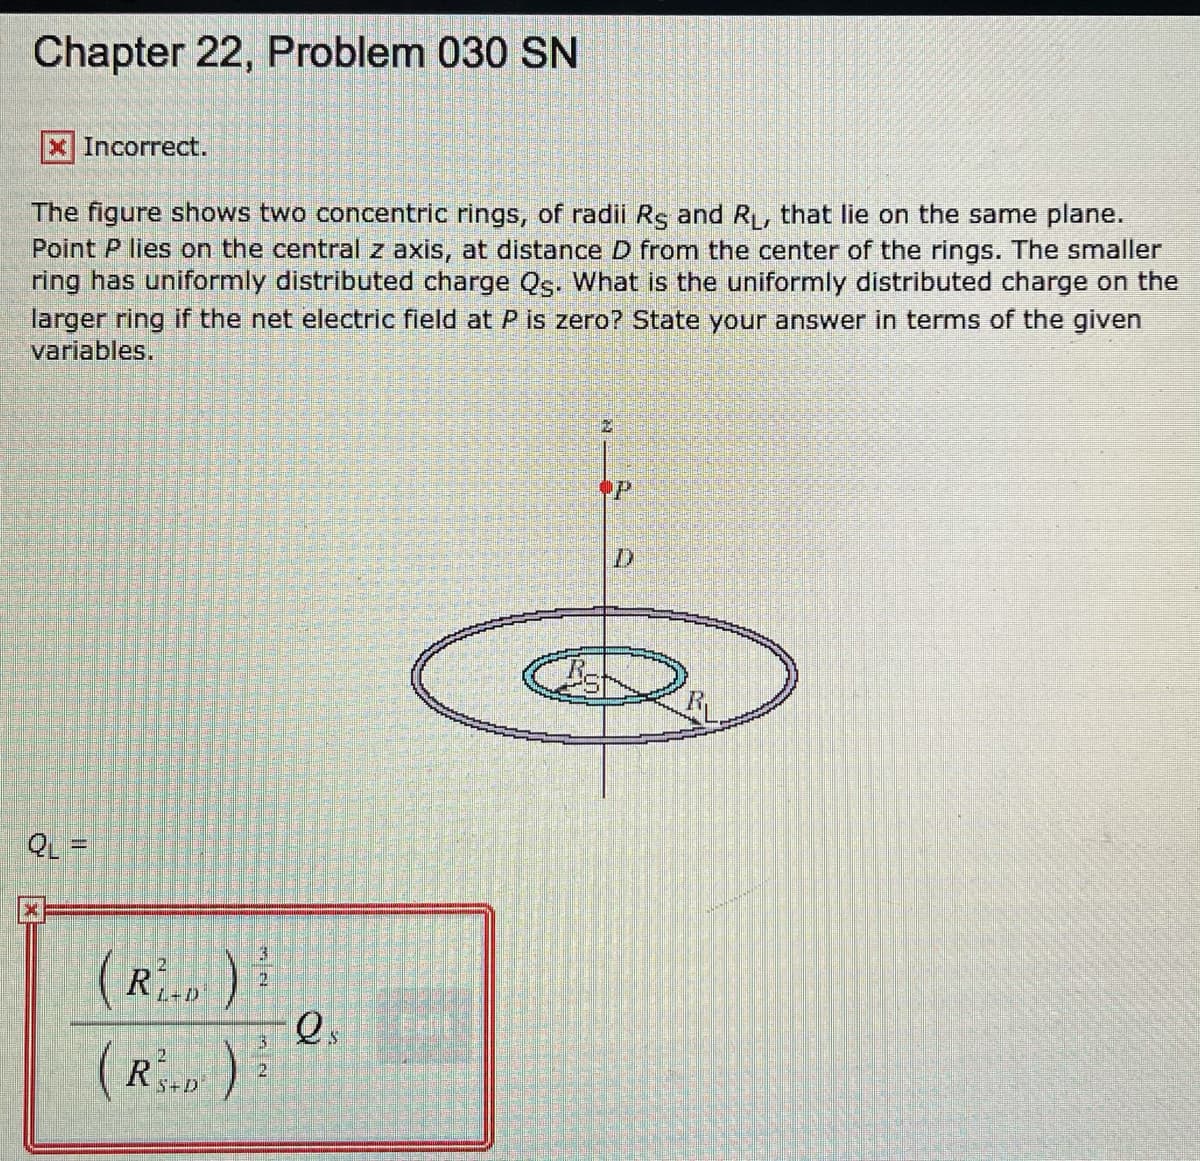 Chapter 22, Problem 030 SN
X Incorrect.
The figure shows two concentric rings, of radii Rs and R, that lie on the same plane.
Point P lies on the central z axis, at distance D from the center of the rings. The smaller
ring has uniformly distributed charge Qs. What is the uniformly distributed charge on the
larger ring if the net electric field at P is zero? State your answer in terms of the given
variables.
QL =
R
L+D
(R):
21
5+D
